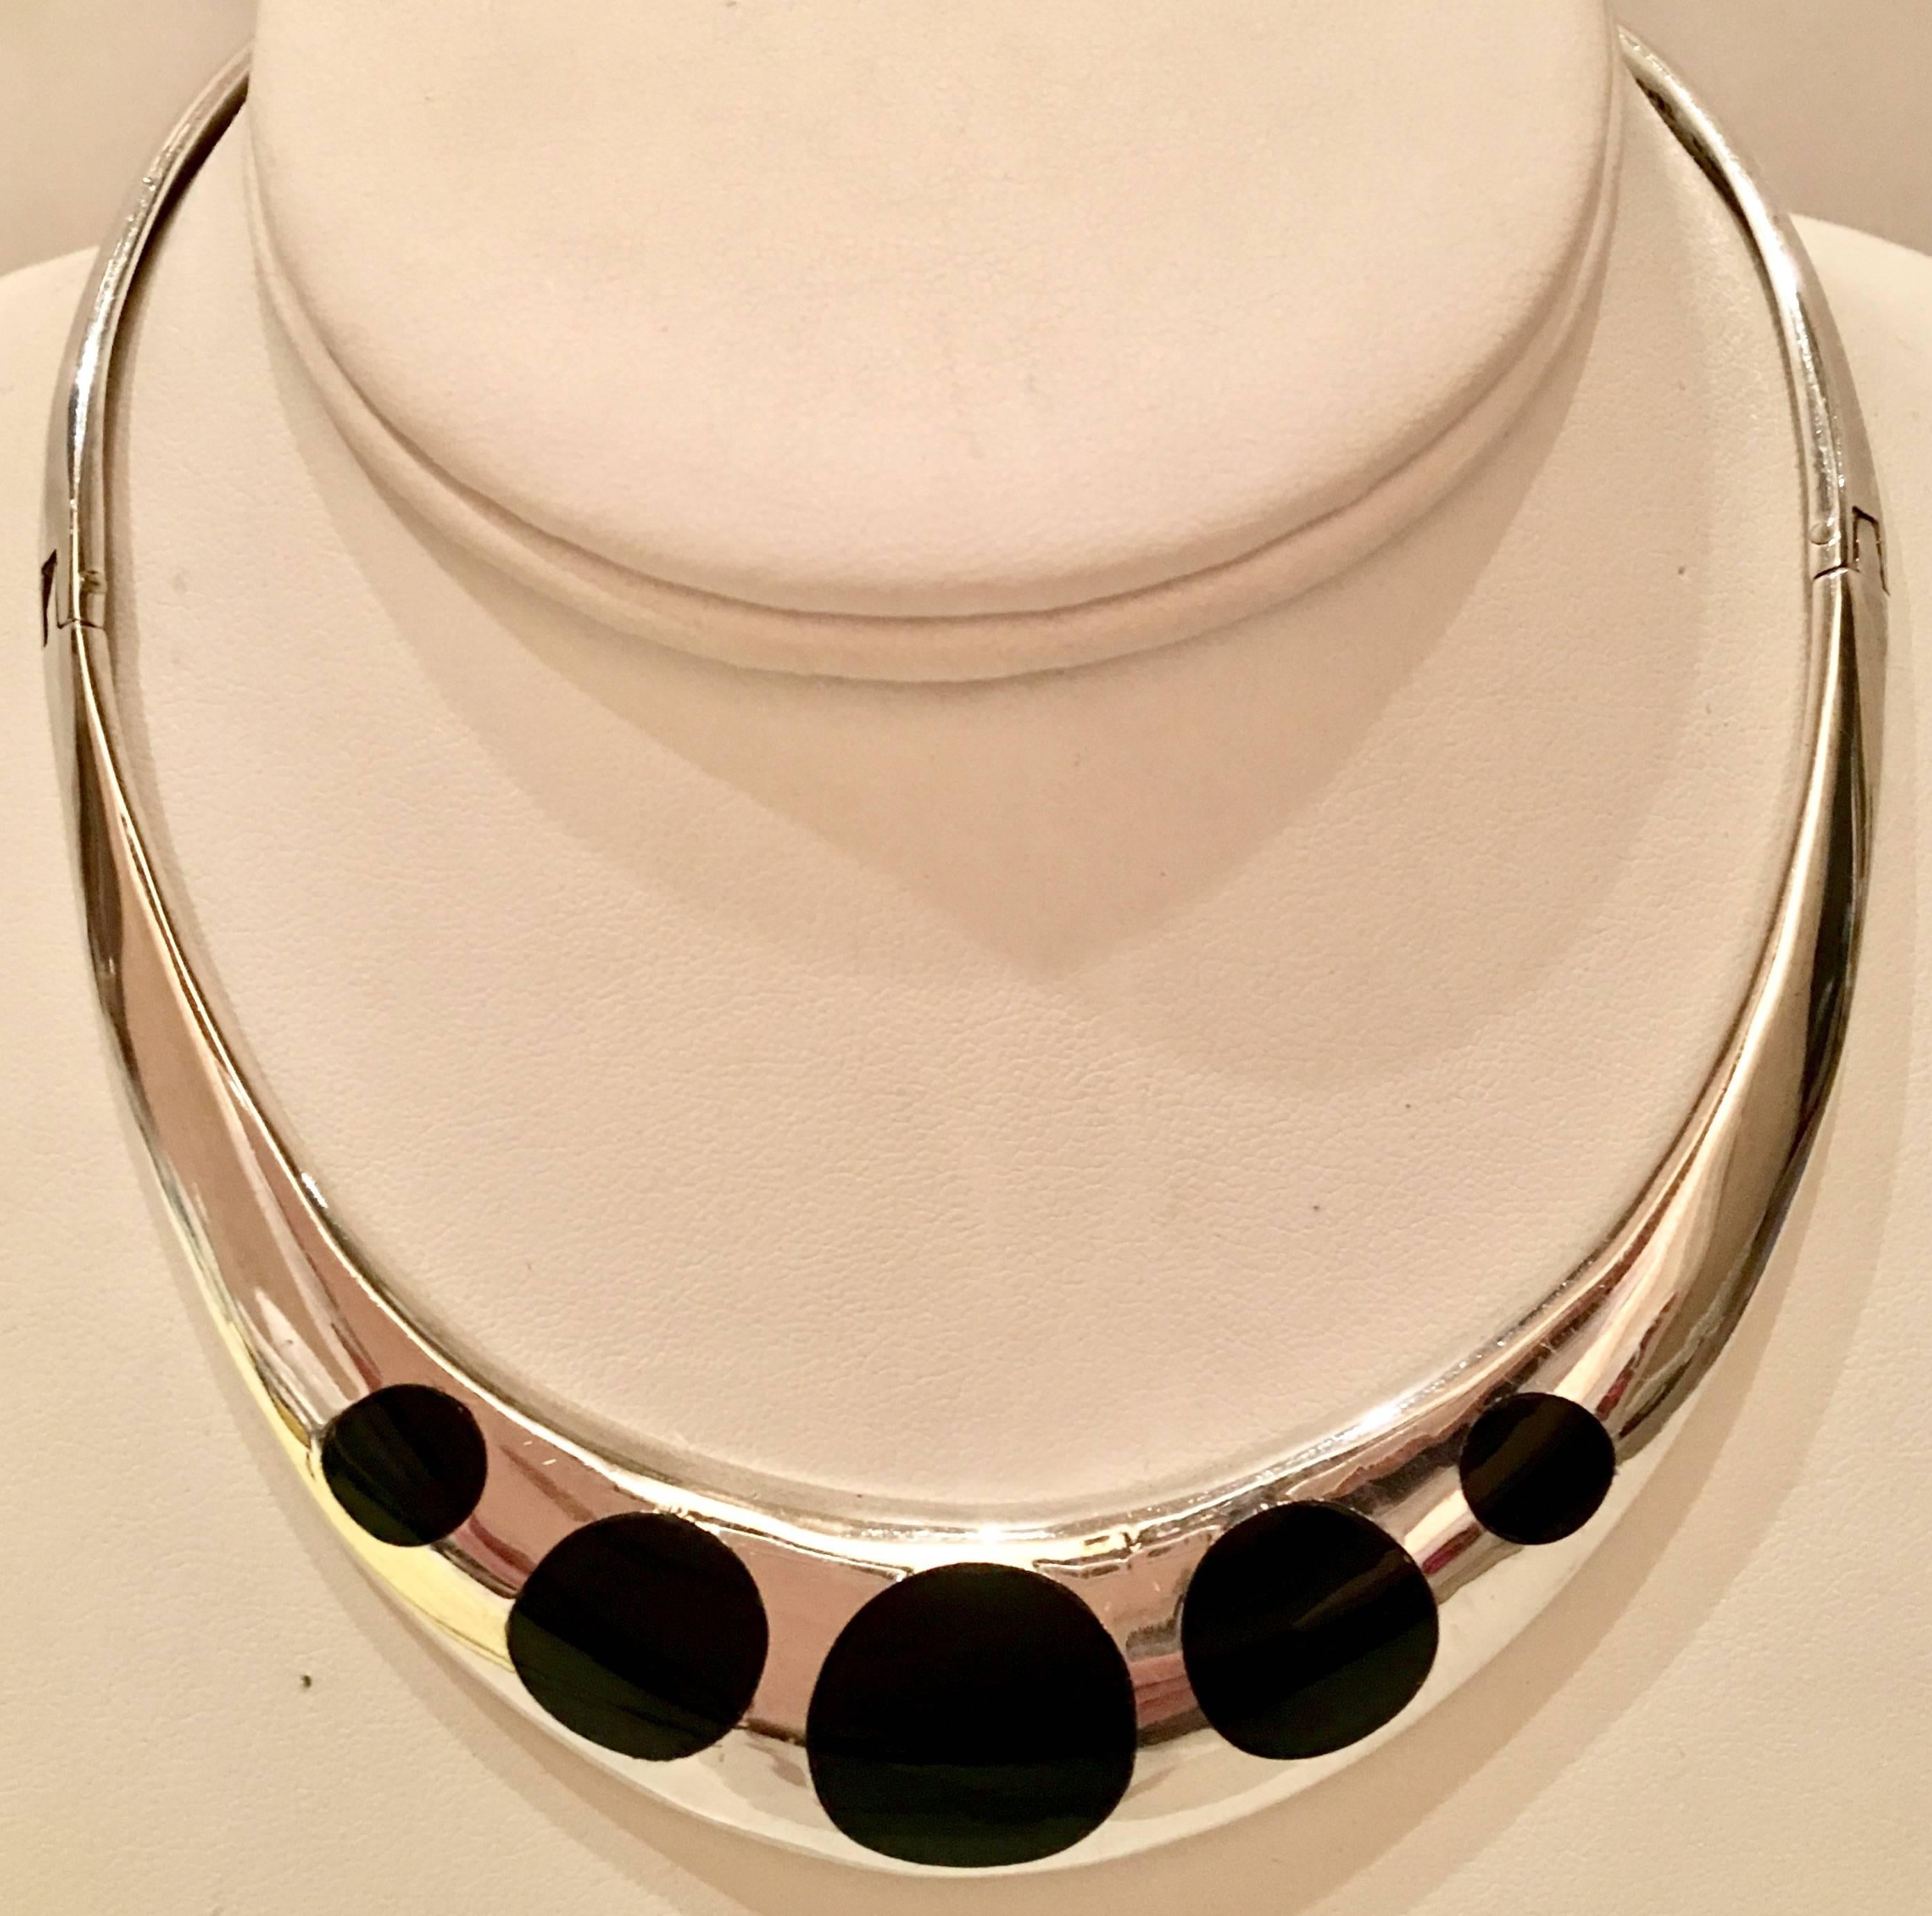 This exceptional and fine modernist signed sterling Taxco hinge collar necklace features five round polished black onyx inlay stones. Stone size varies from .25"; -.75" inches diameter. The design of this double hinged collar intends to